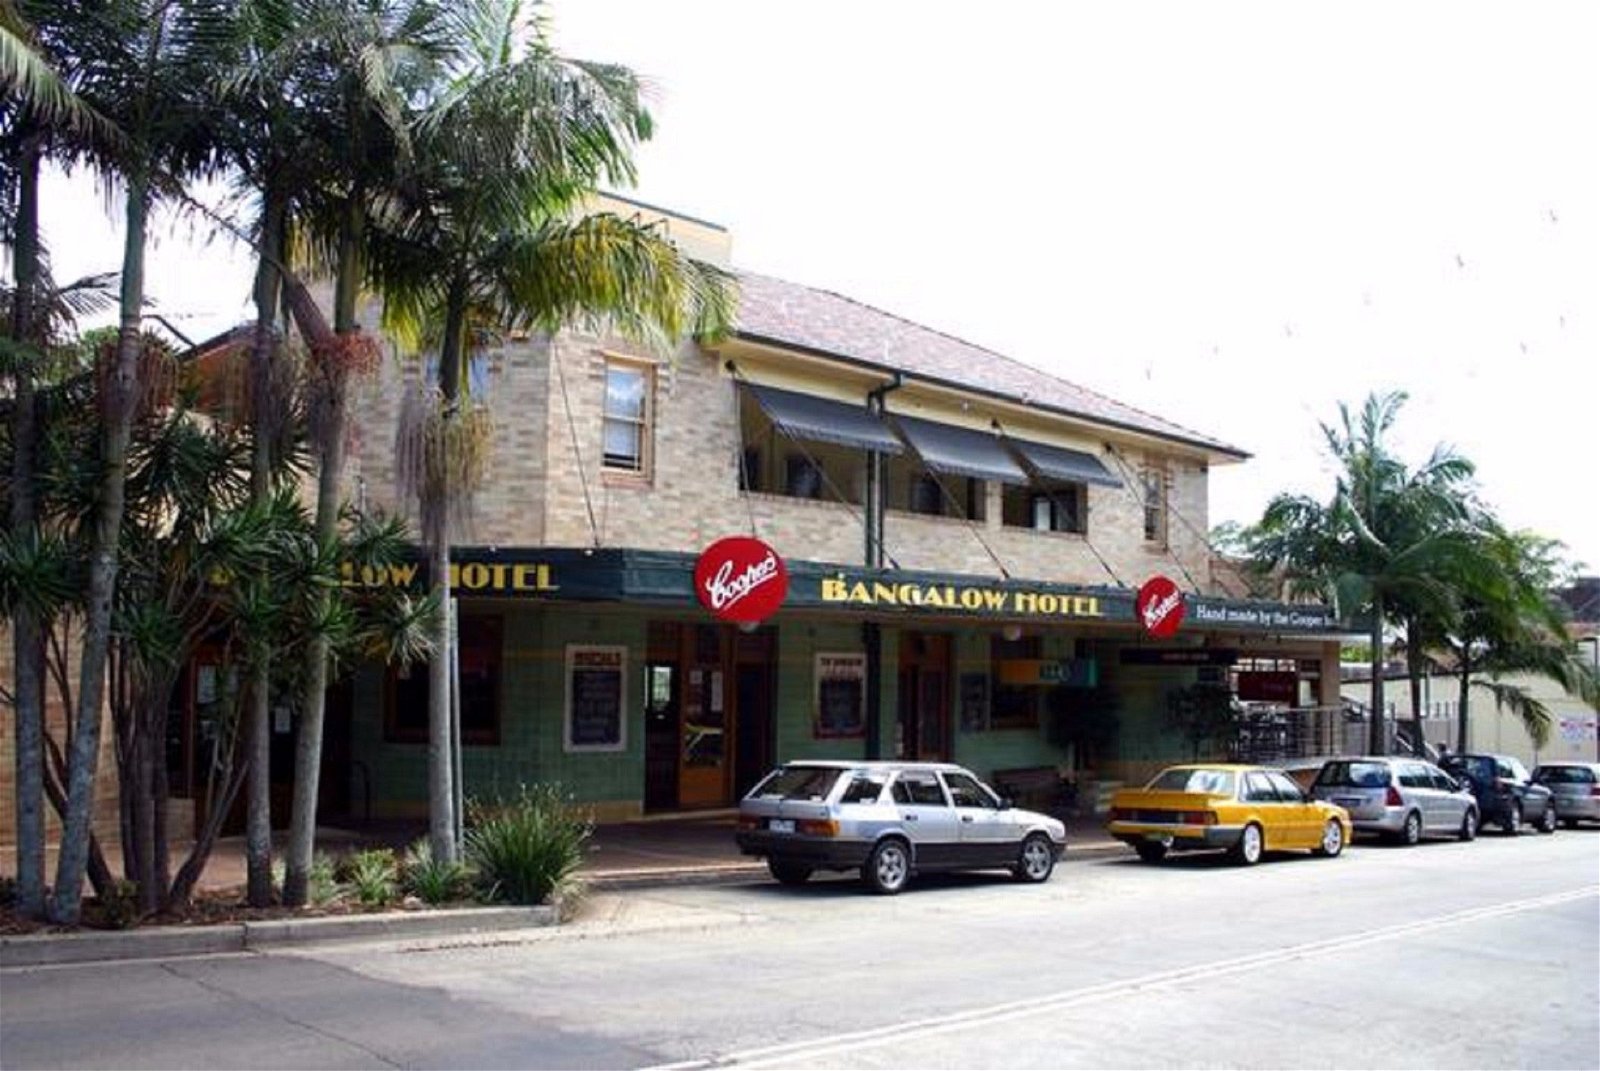 Bangalow Hotel - Food Delivery Shop